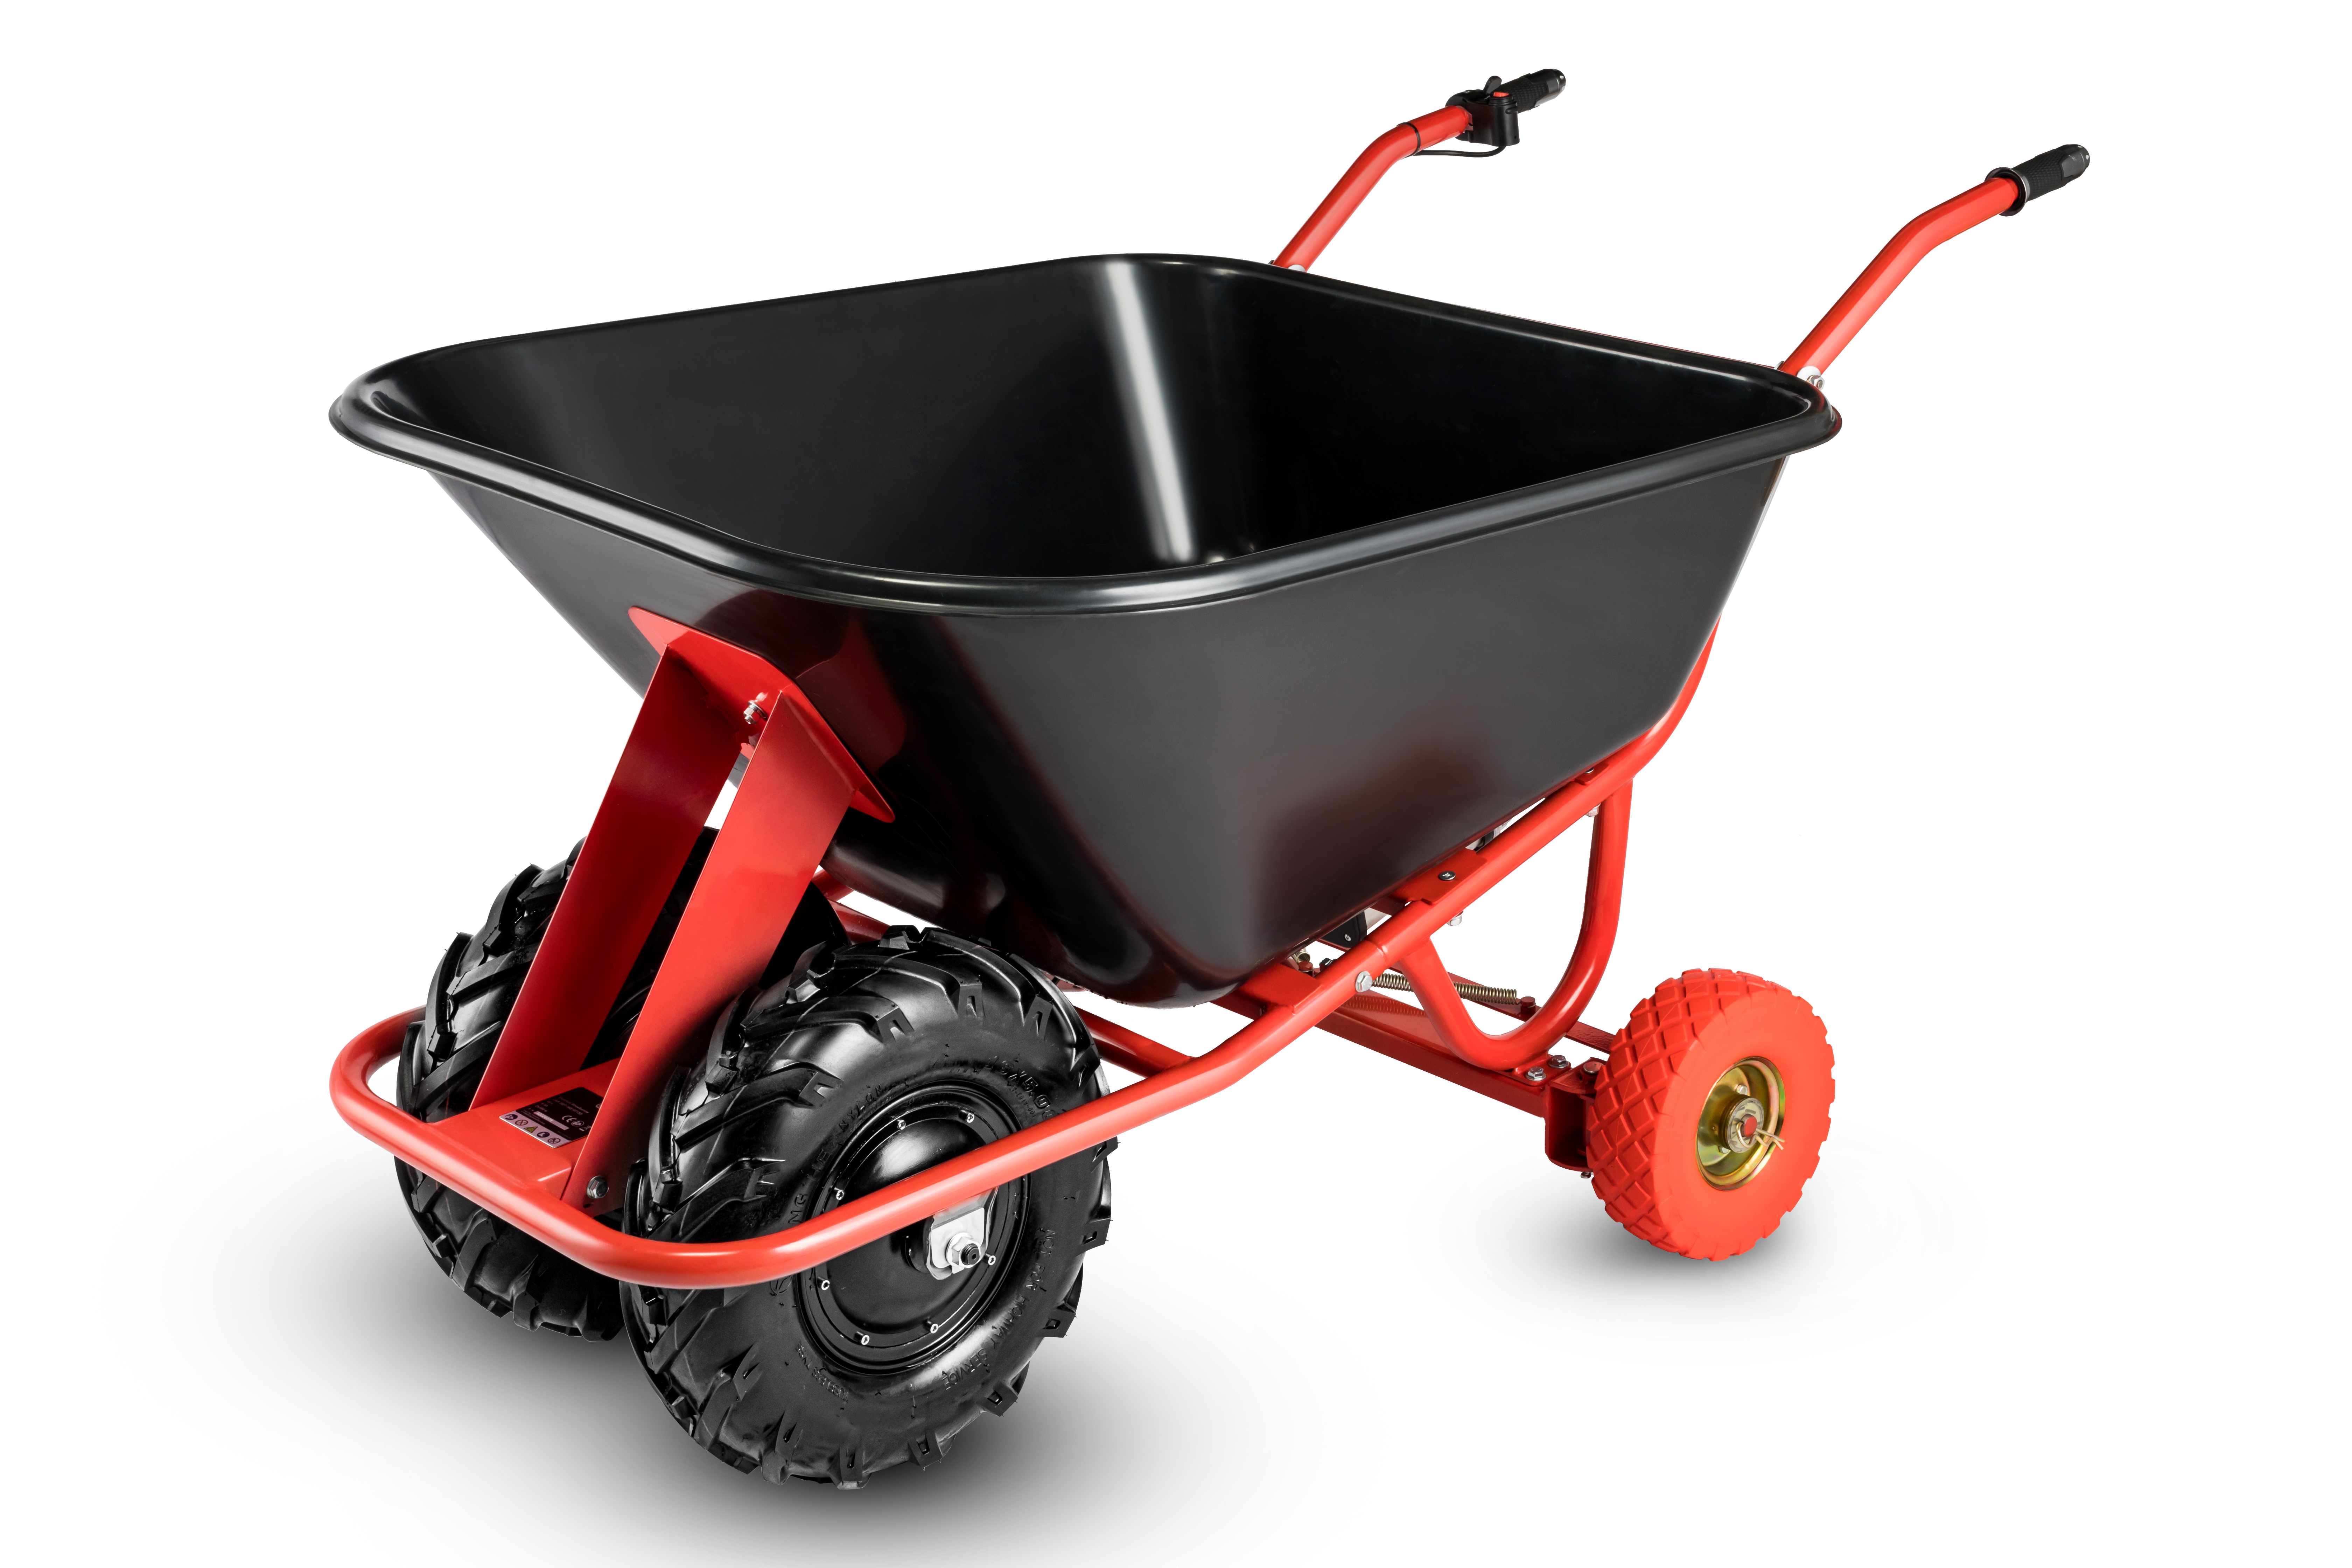 EWD300A-160,Electric wheelbarrow with lithium battery, 160L tray ,with two 280w gear motor,5.00-8 tyre,Forwarder&reverse direction Featured Image